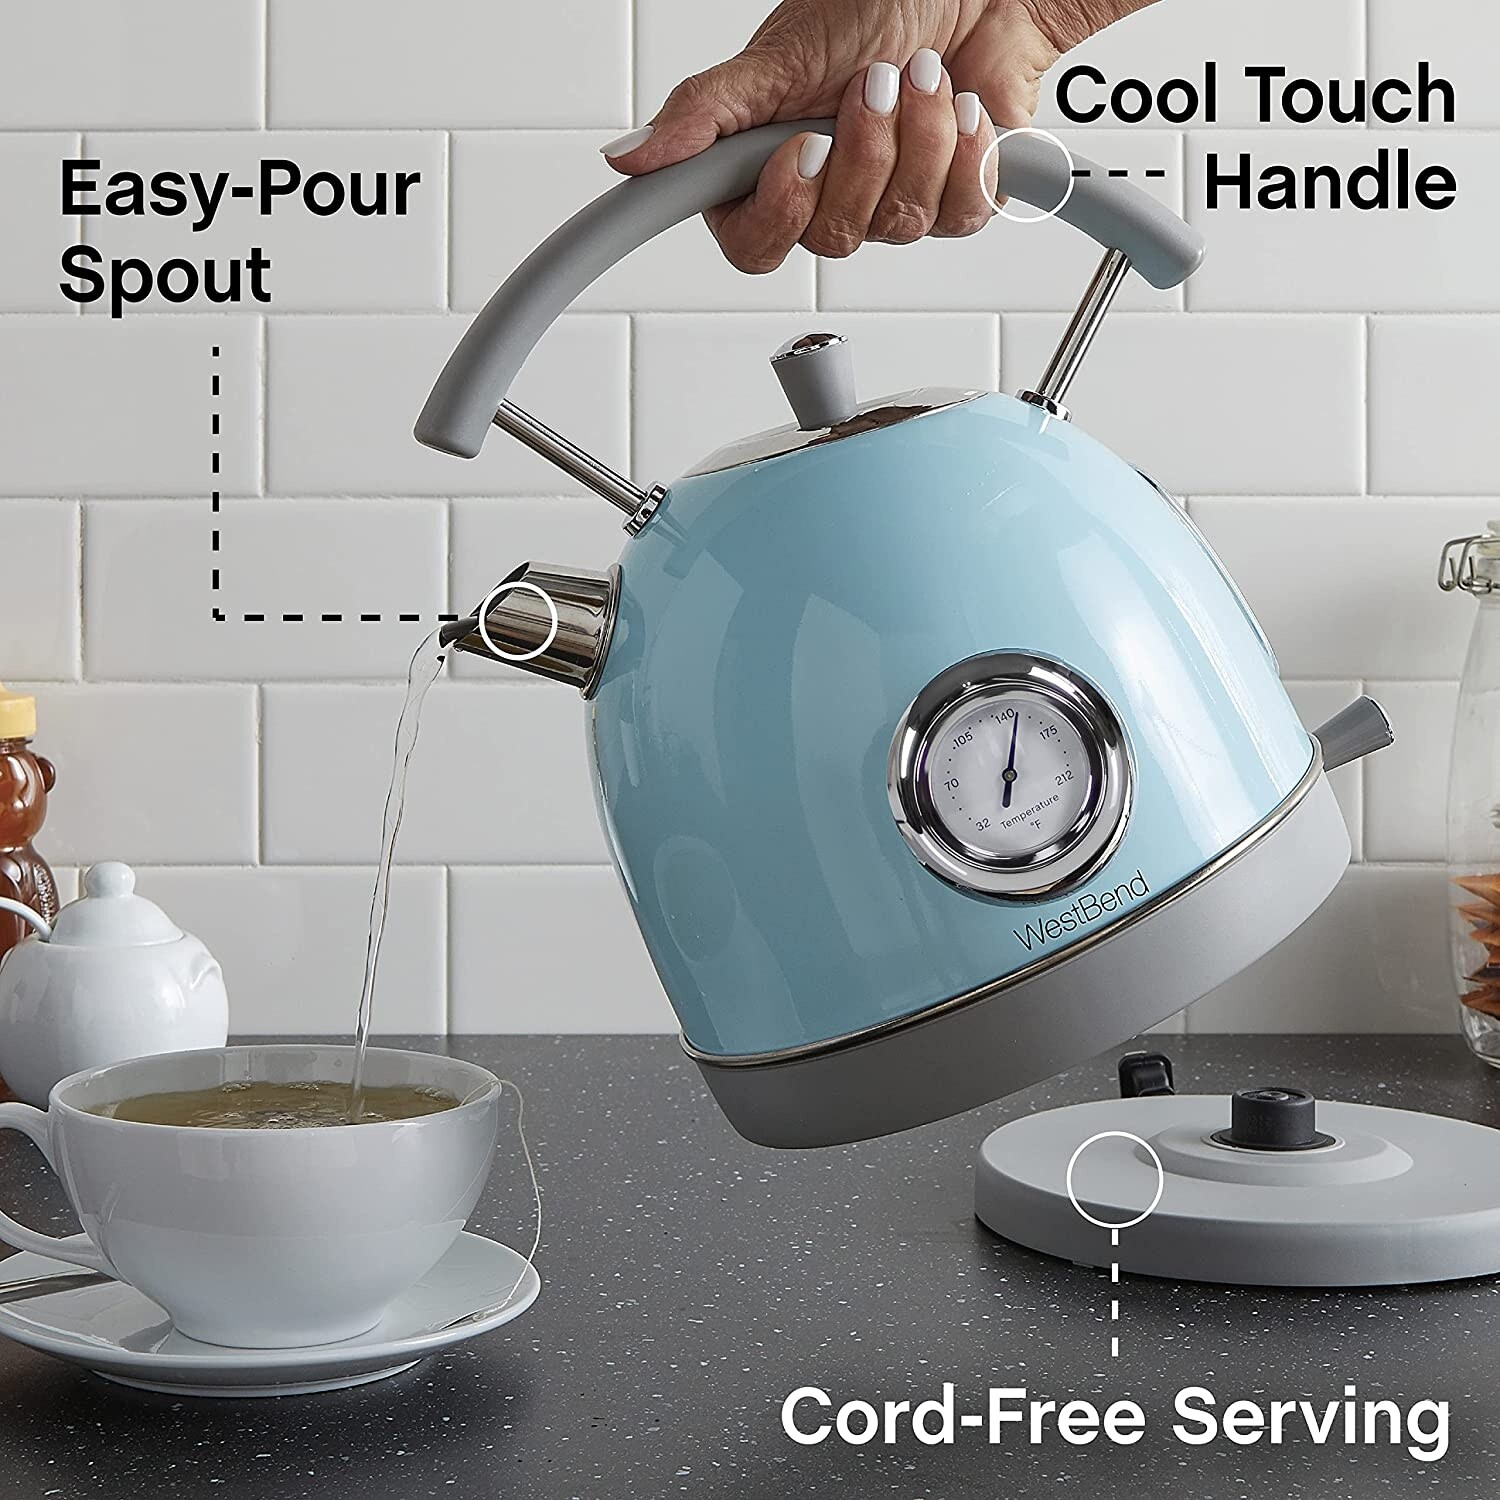 https://ak1.ostkcdn.com/images/products/is/images/direct/84c8e9cbb22fba1c51a1e373599e25b6b327ba92/West-Bend-Electric-Kettle-Retro-Styled-Stainless-Steel-1500-Watts-with-Auto-Shutoff-%26-Boil-Dry-Protection%2C-1.7-Liter%2C-Blue.jpg